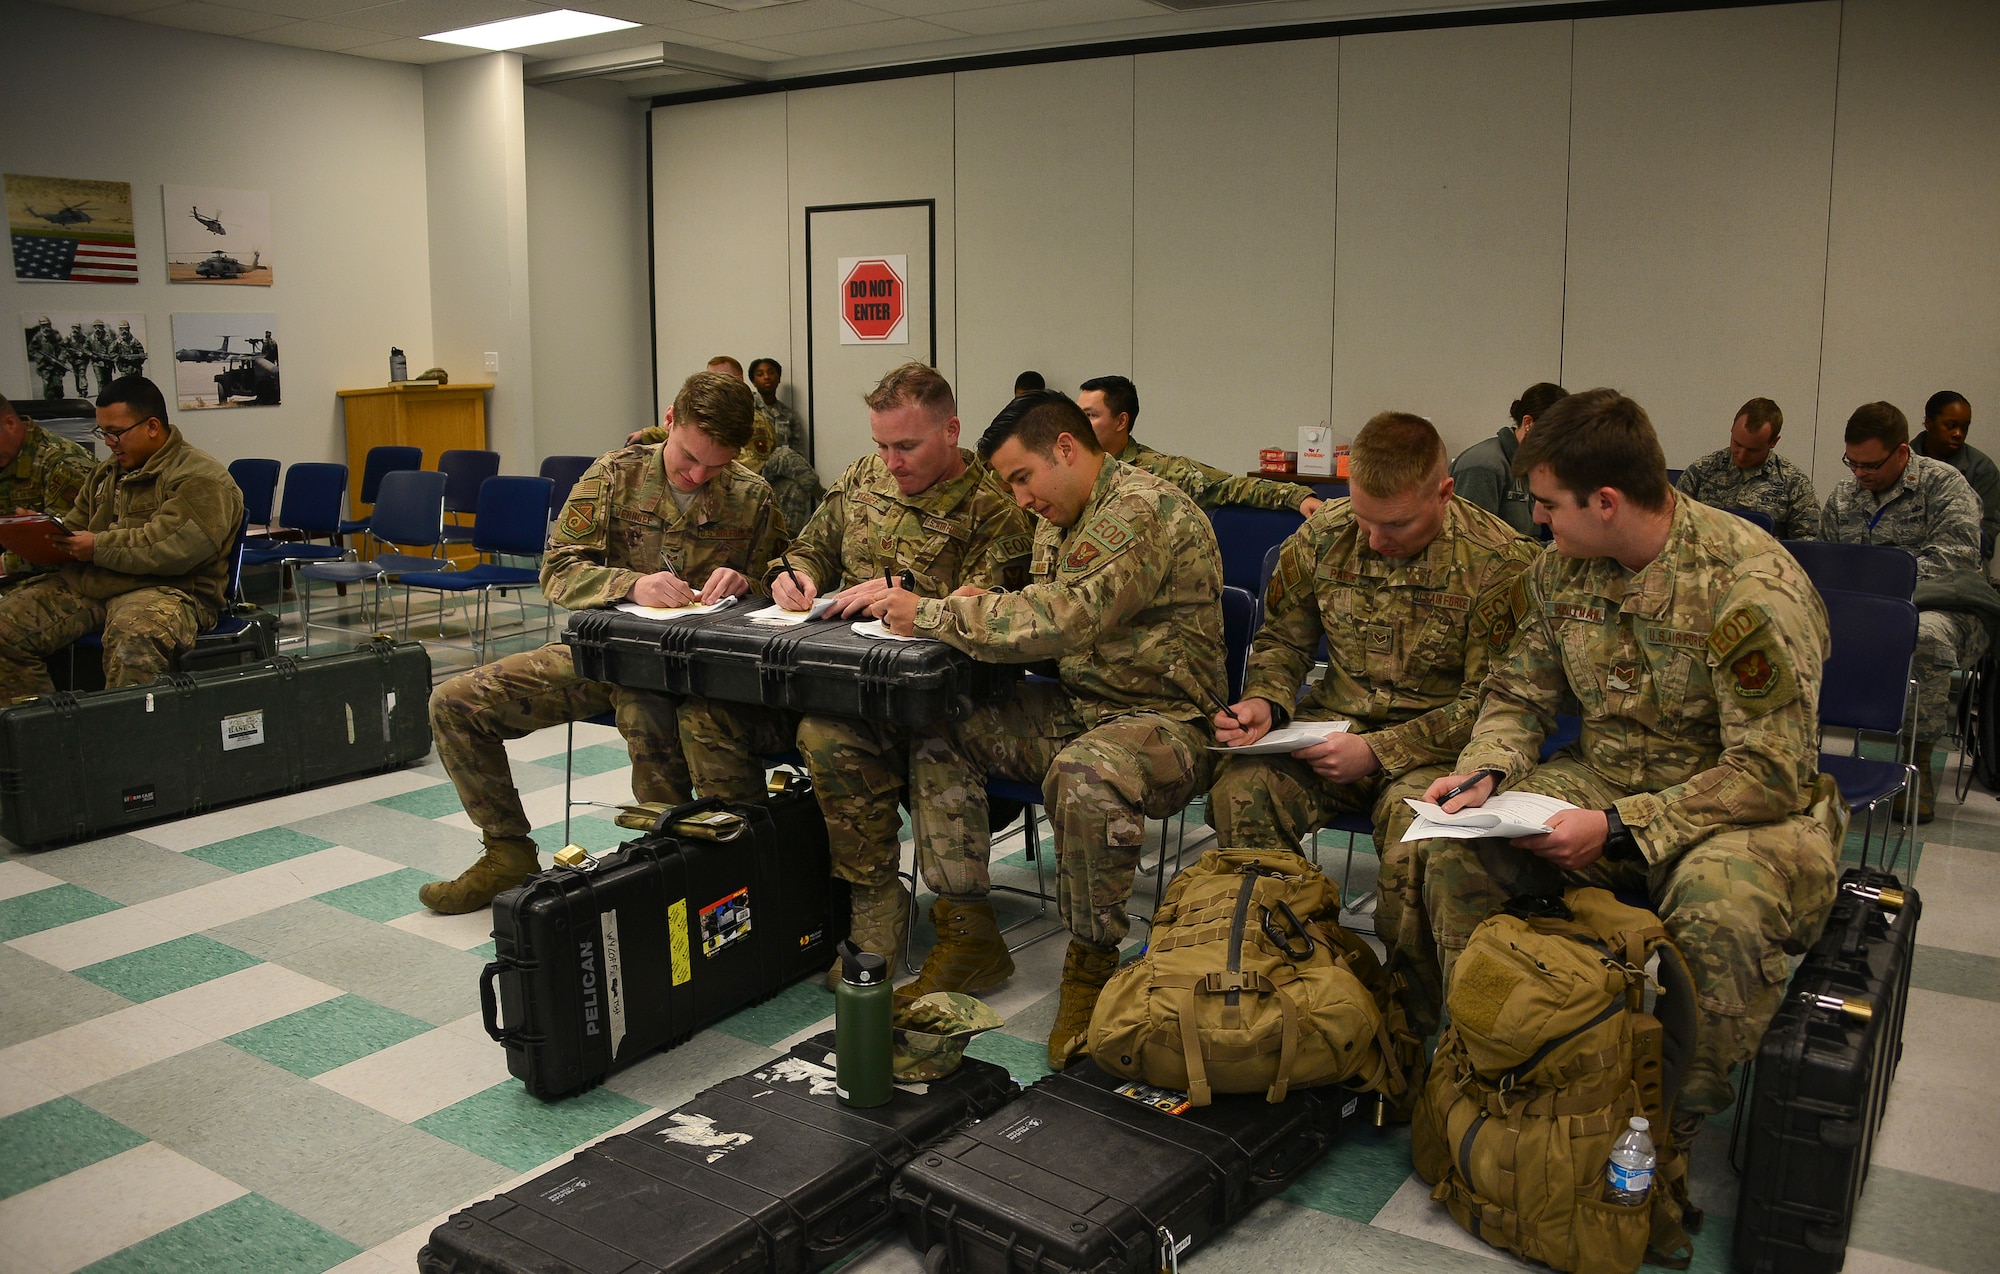 Members of Team Kirtland fill out pre-deployment paperwork during exercise Global Thunder 20 at Kirtland Air Force Base, N.M., Oct. 24, 2019. Global Thunder is a worldwide exercise that provides training opportunities for all of U.S. Strategic Command’s mission areas, tests joint and field training operations, and has a specific focus on nuclear readiness. (U.S. Air Force photo by Staff Sgt. Kimberly Nagle)